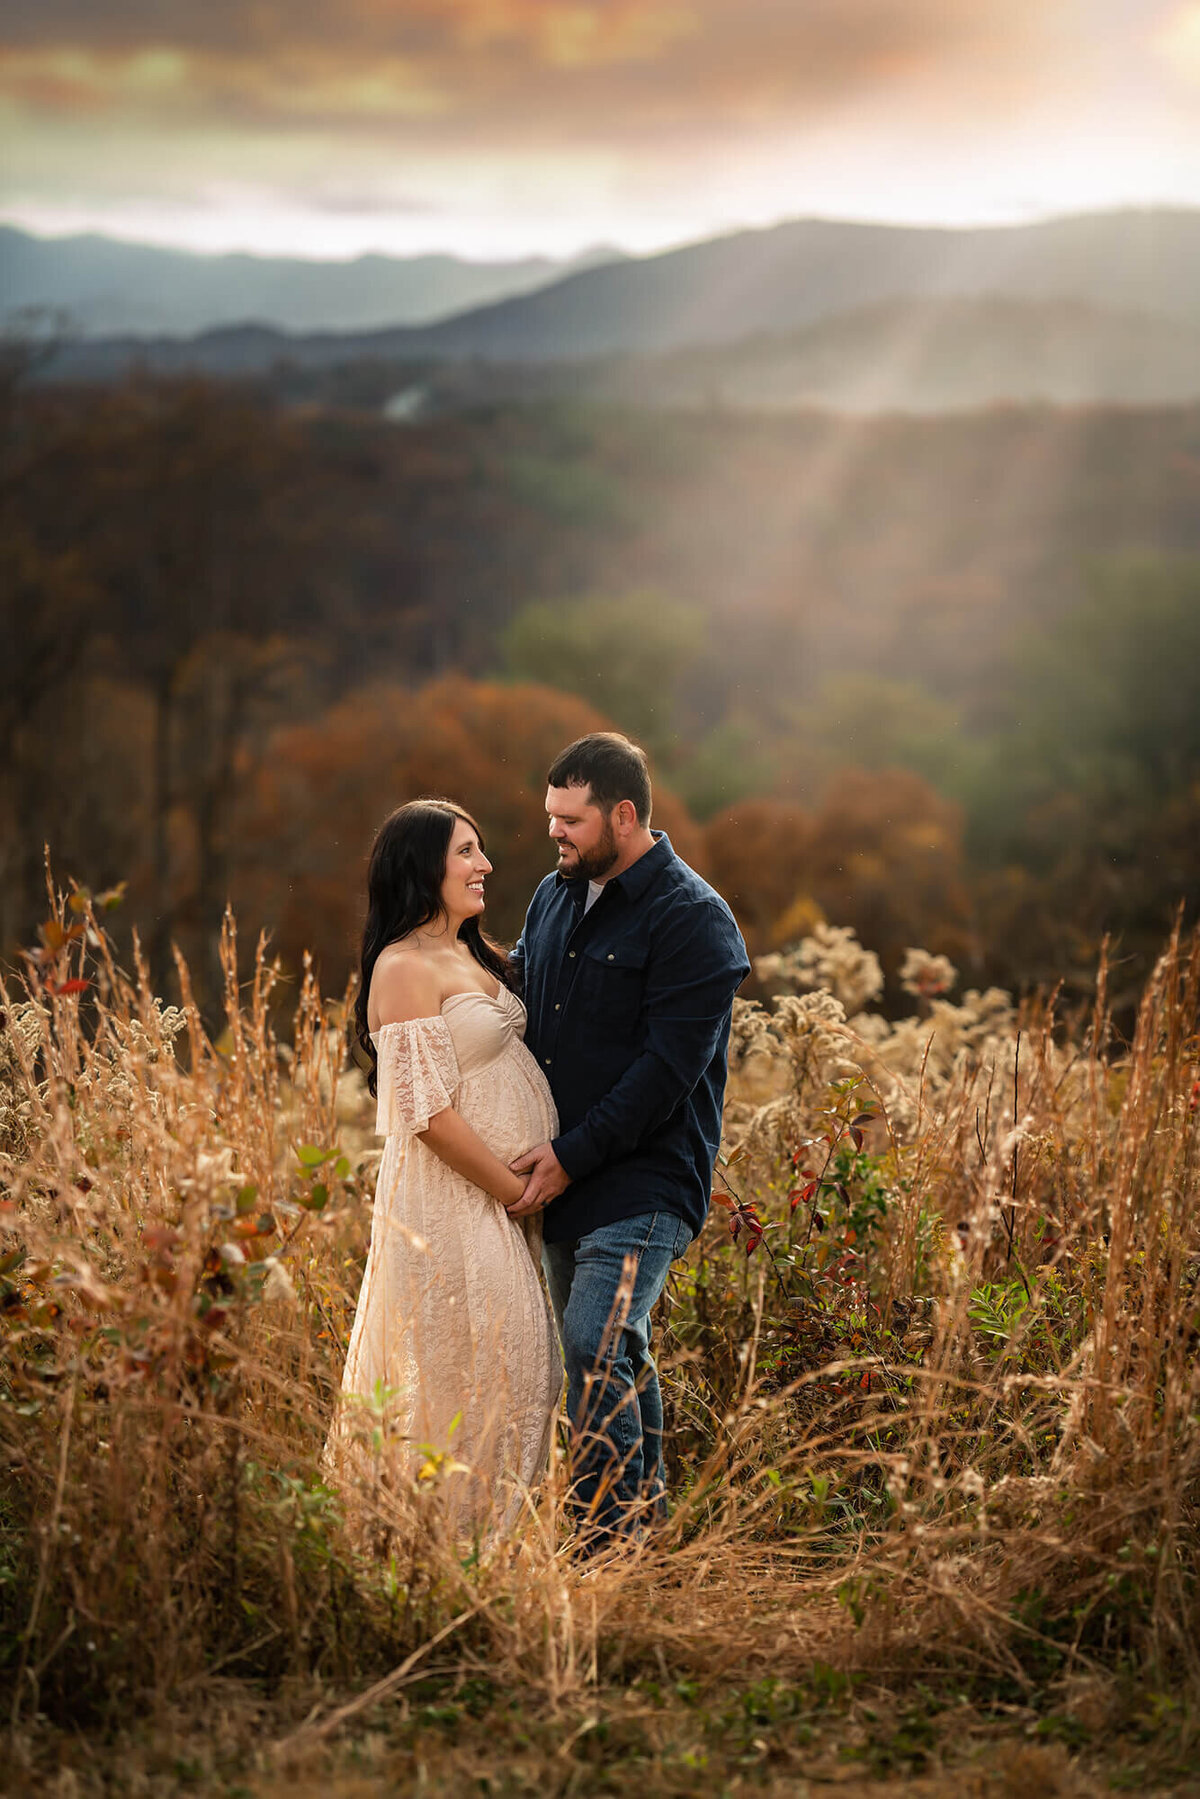 An expecting Couple  cradling the baby bump and standing in the tall grass